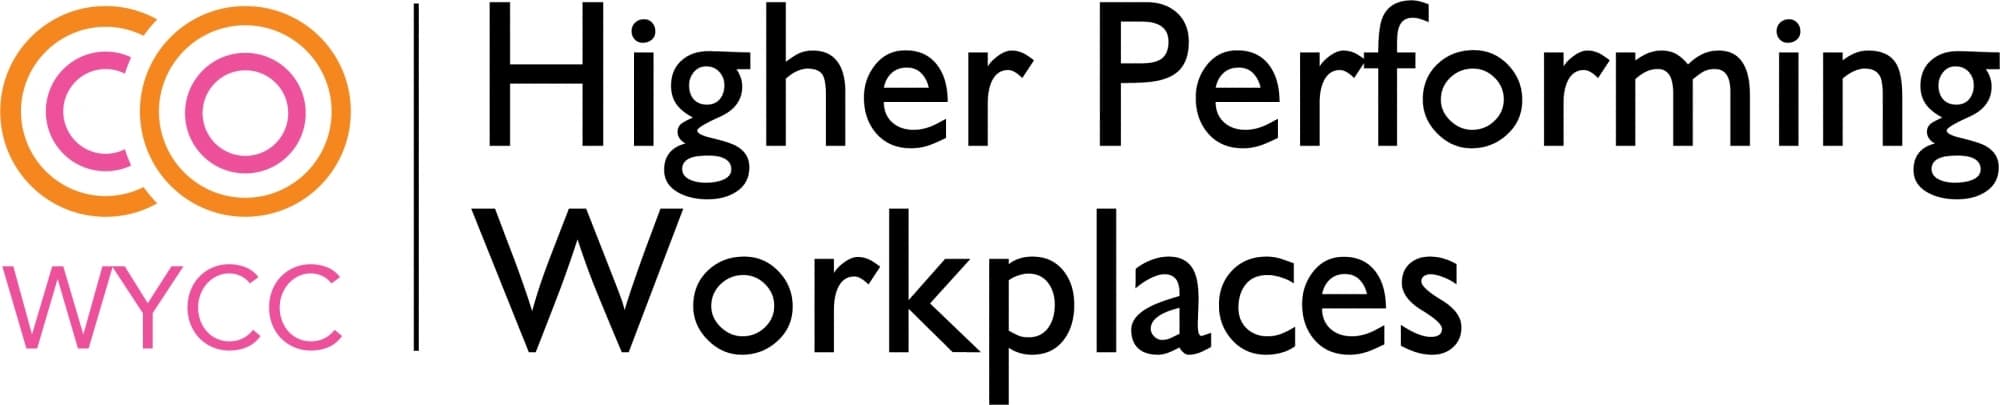 Wycc Higher Performing Workplaces logo